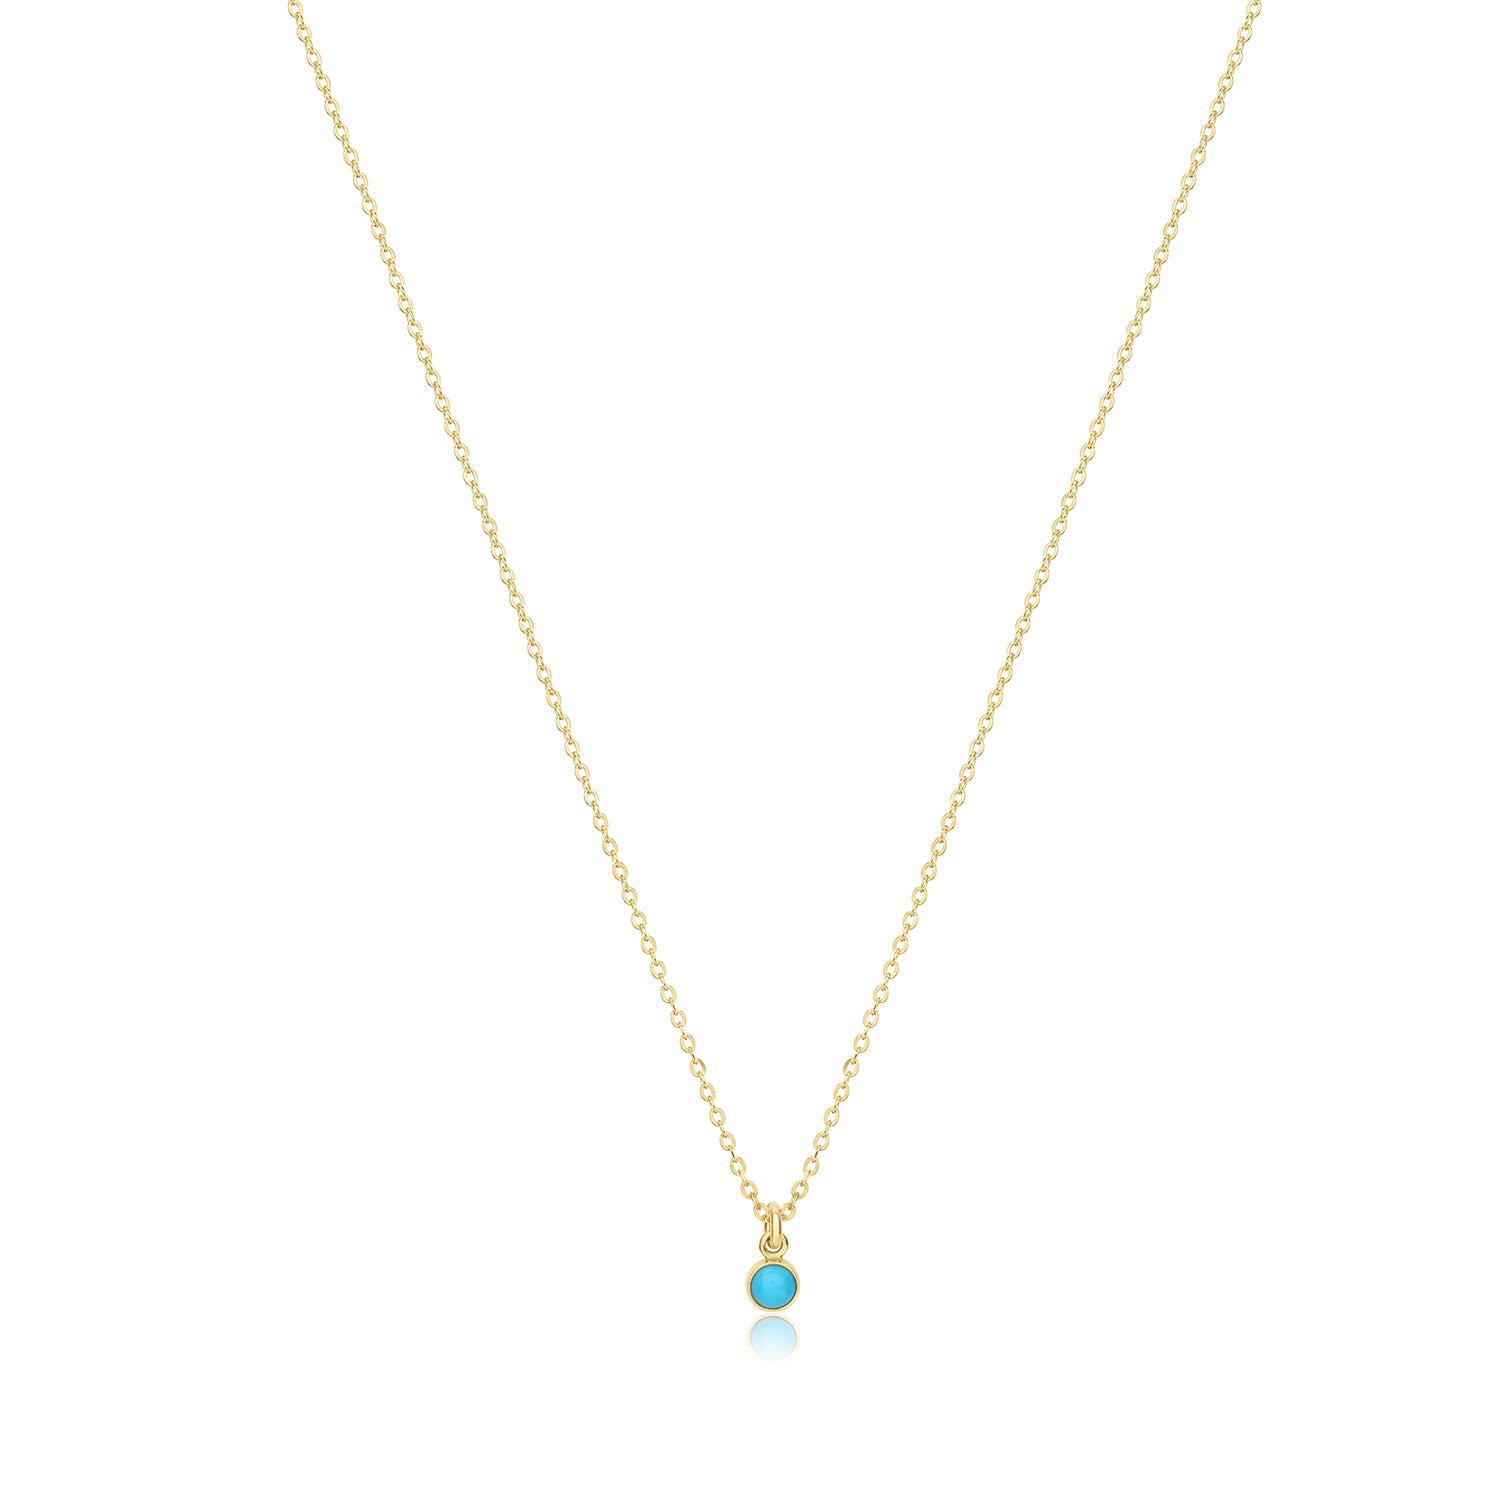 The Rock River Turquoise Necklace, 2